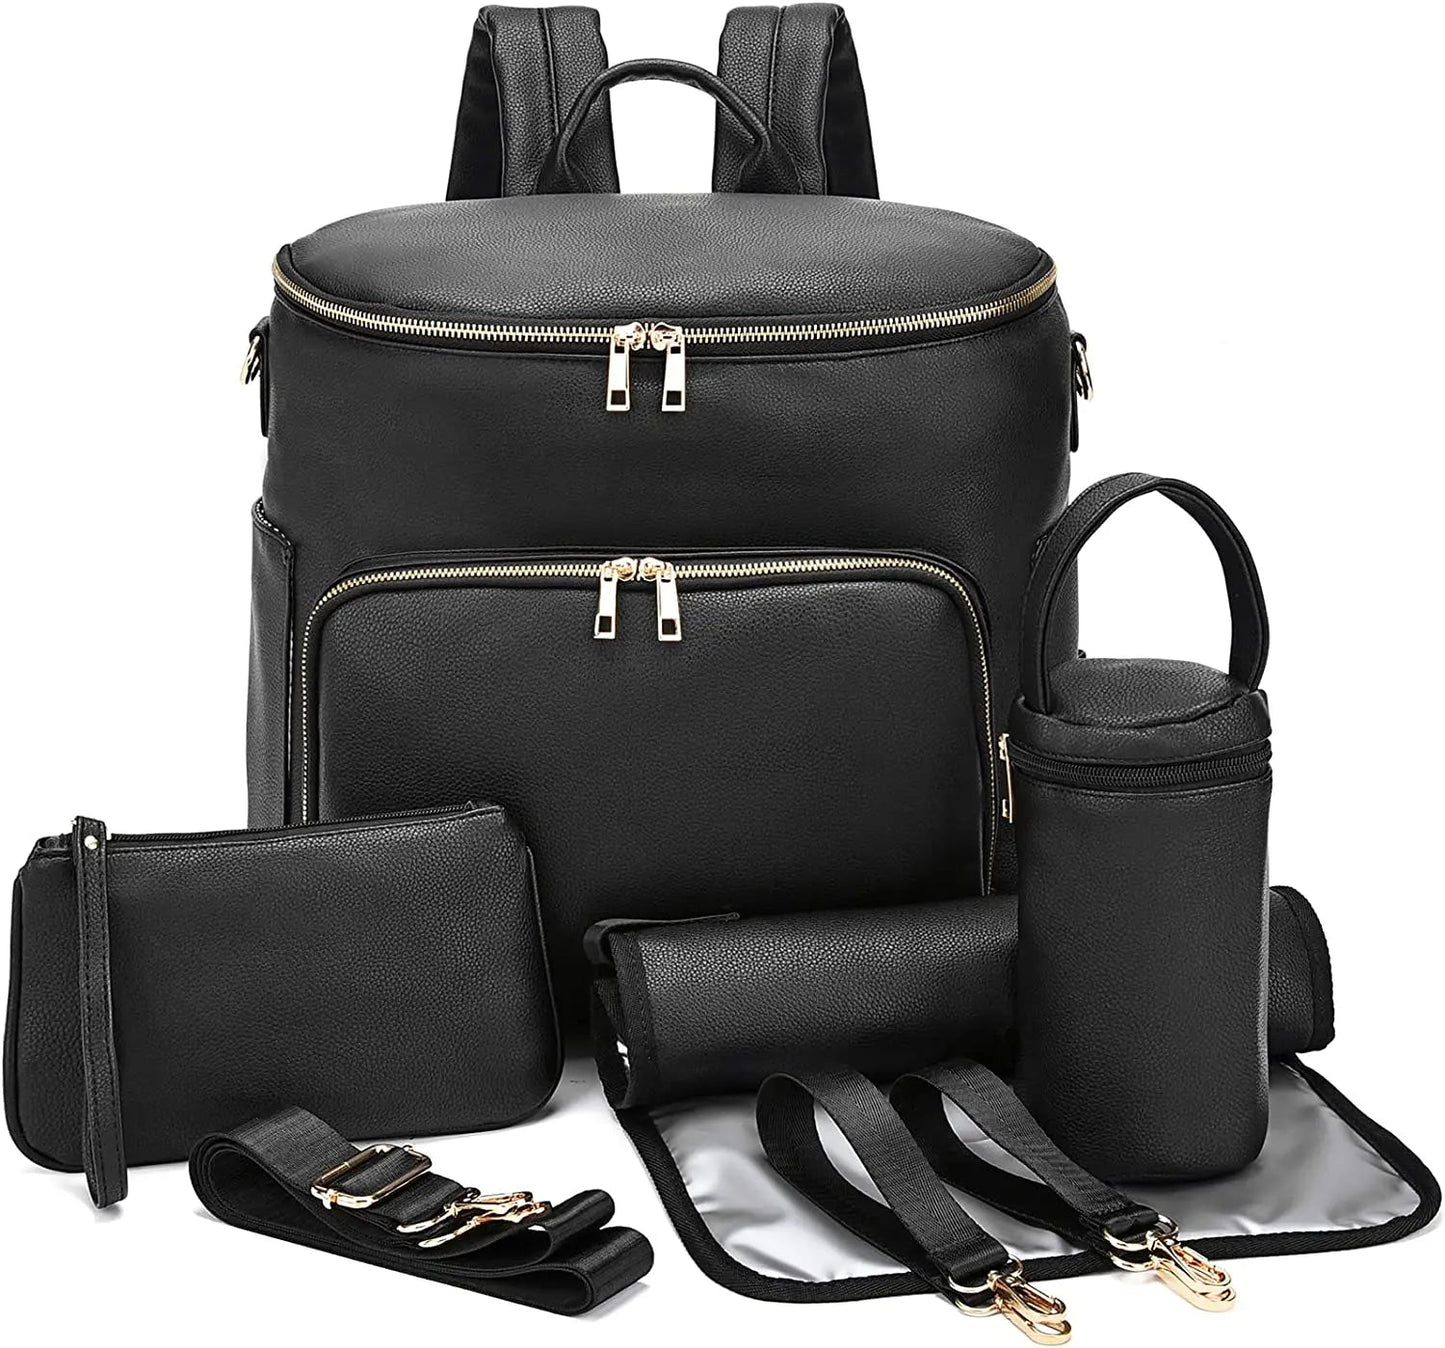 Black Faux Leather Diaper Backpack